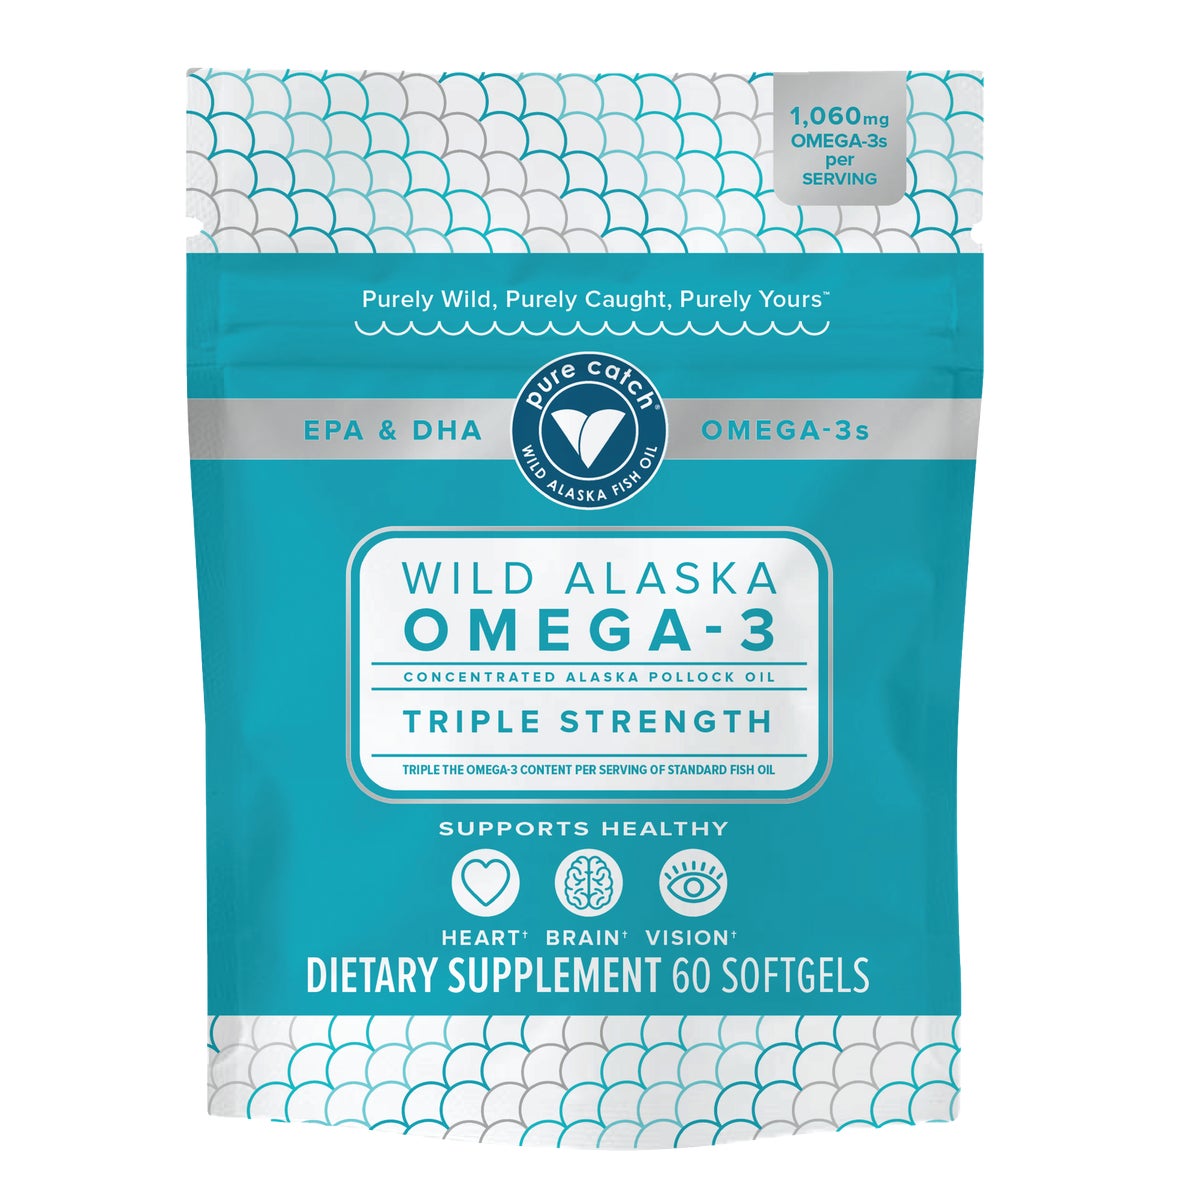 Wild Alaska Omega-3 Concentrated Fish Oil Supplement